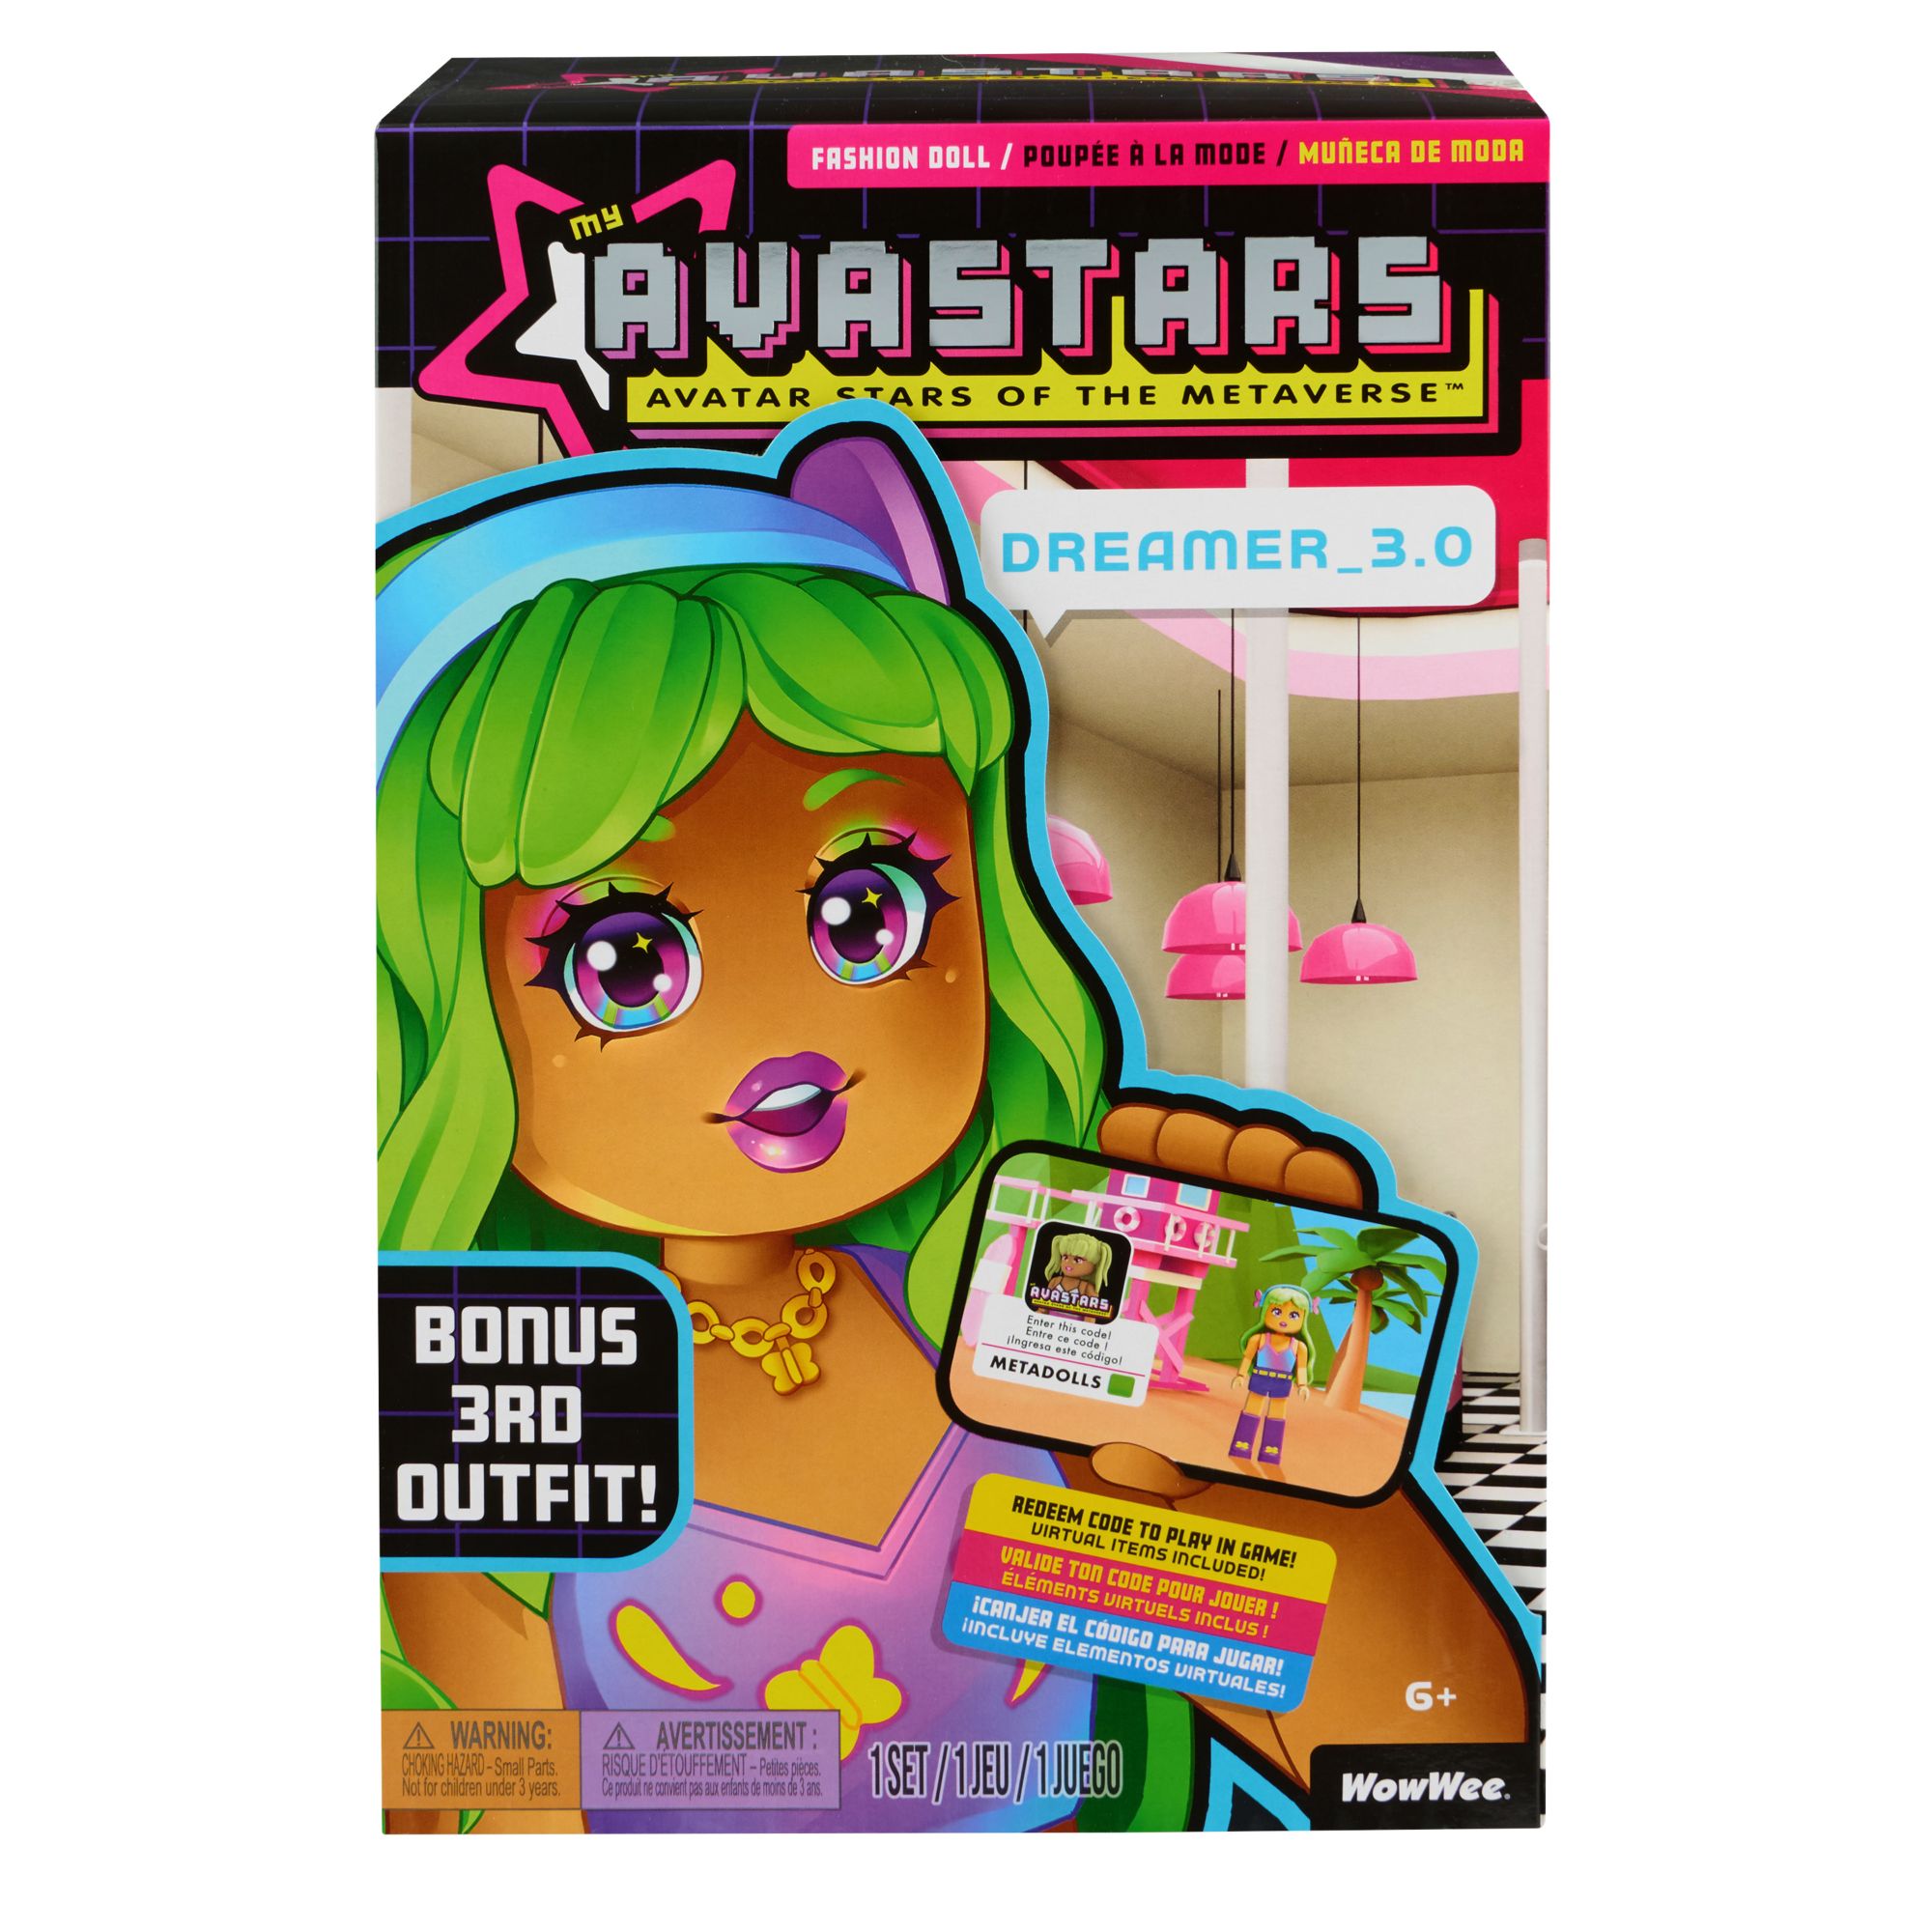 Avastars Deluxe Doll Outfit - dreamer3.0